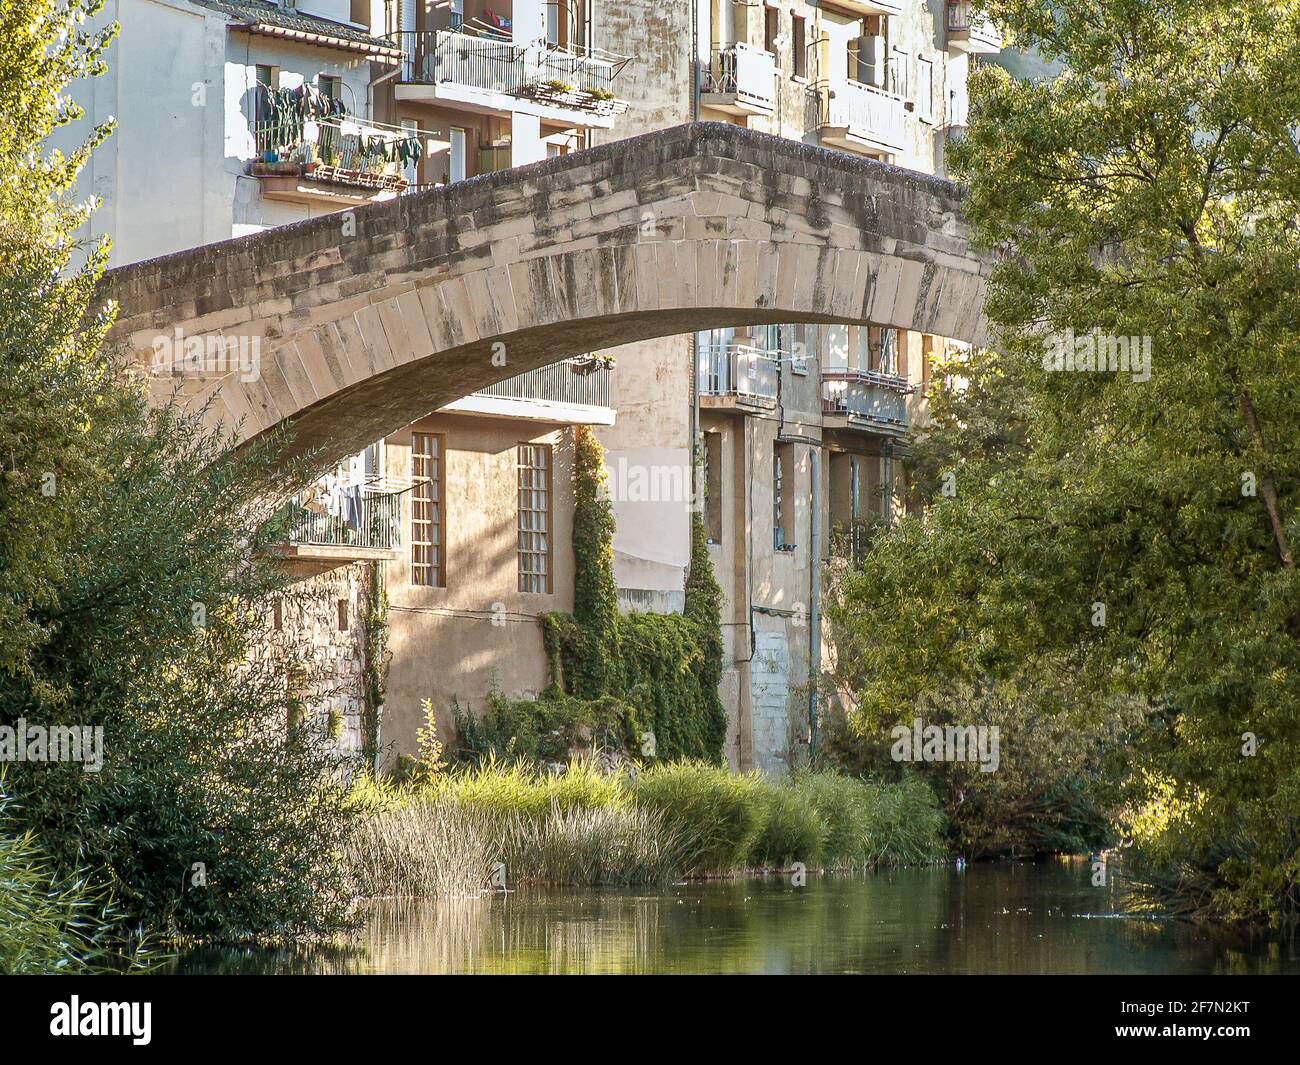 The medieval bridge Puente Carcel with houses in the background, Estella, Spain, October 17, 2009 Stock Photo